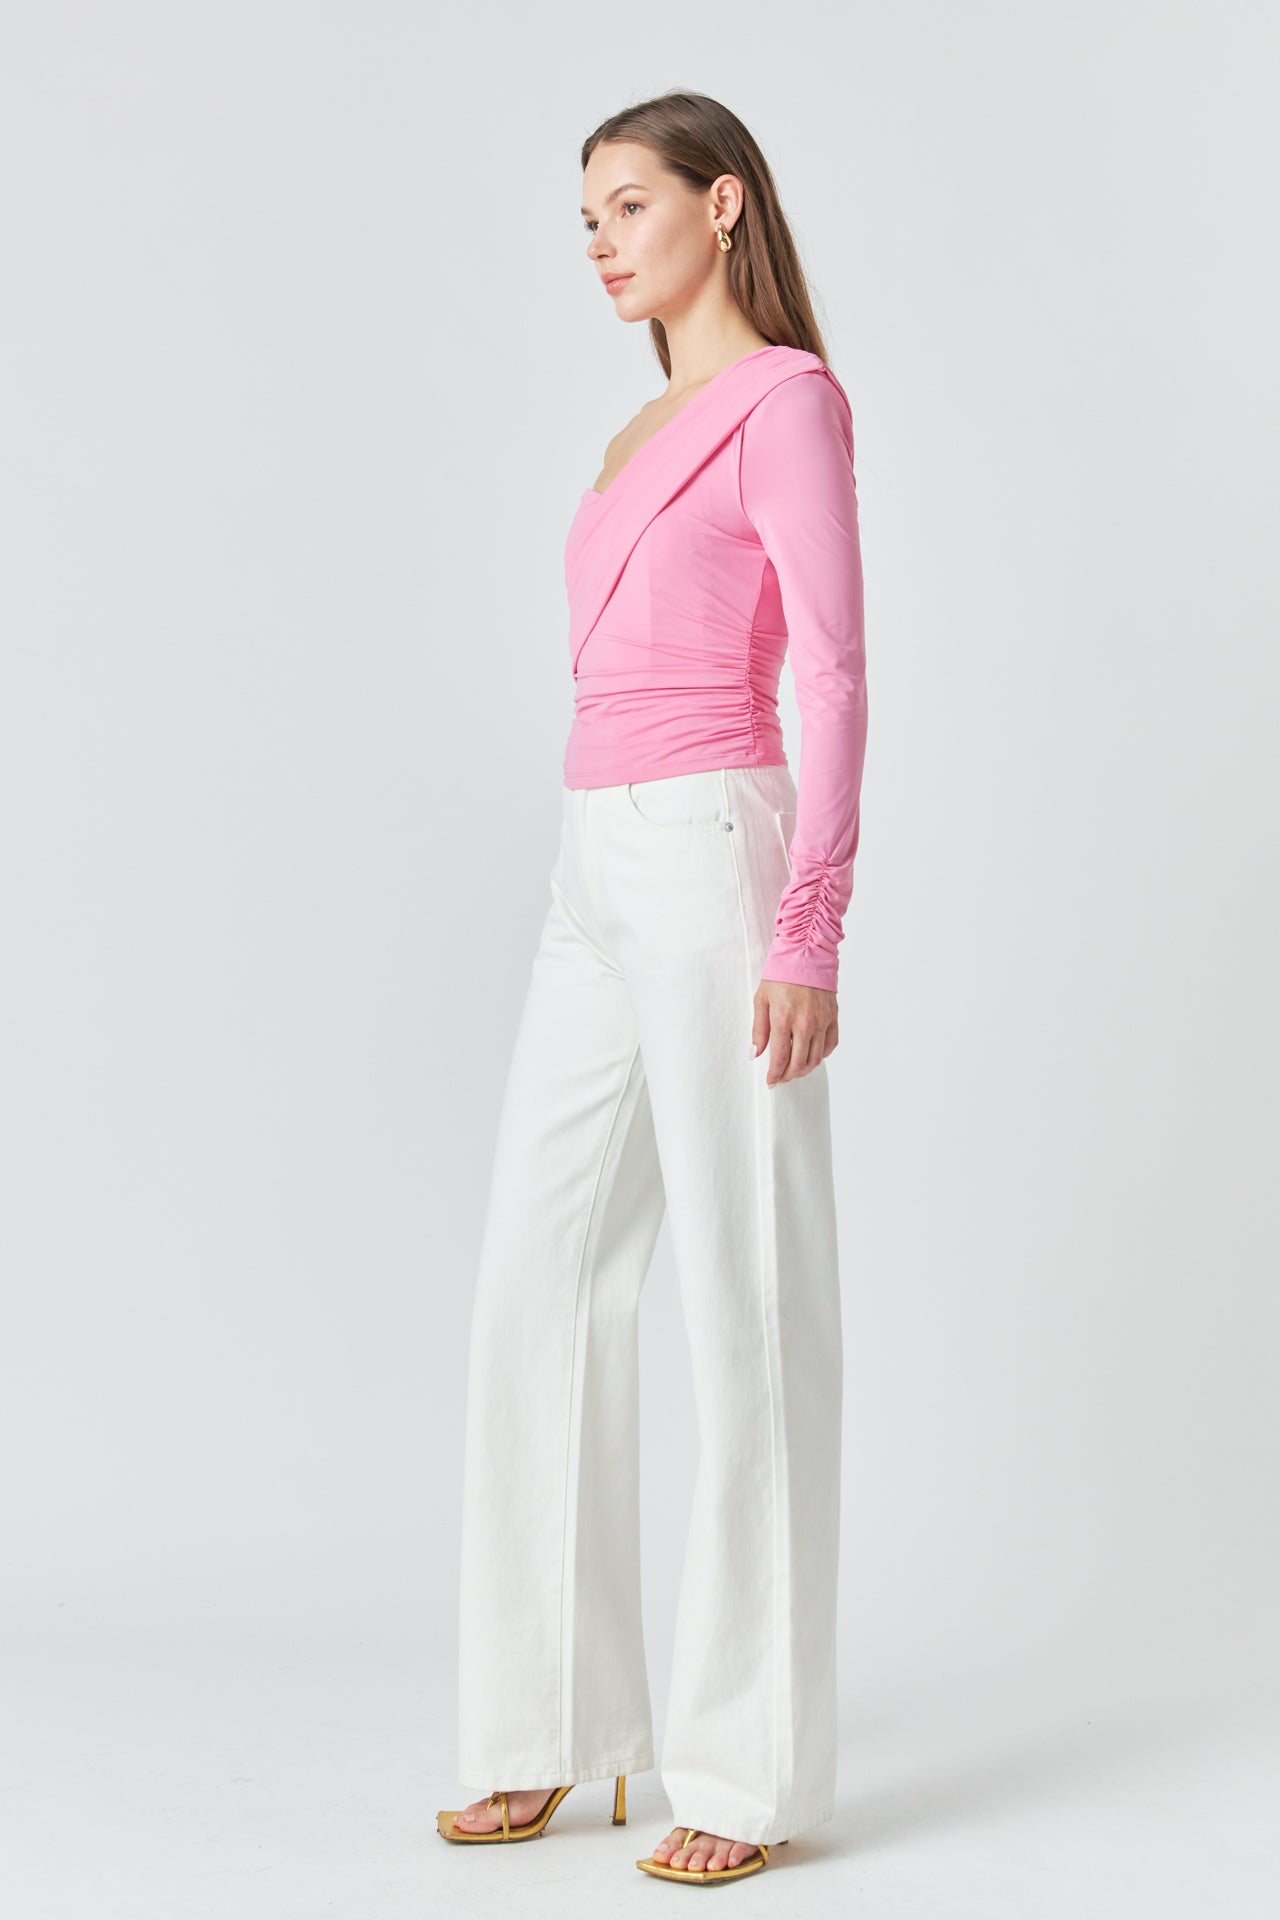 ENDLESS ROSE - One Shoulder Shirred Knit Top - TOPS available at Objectrare